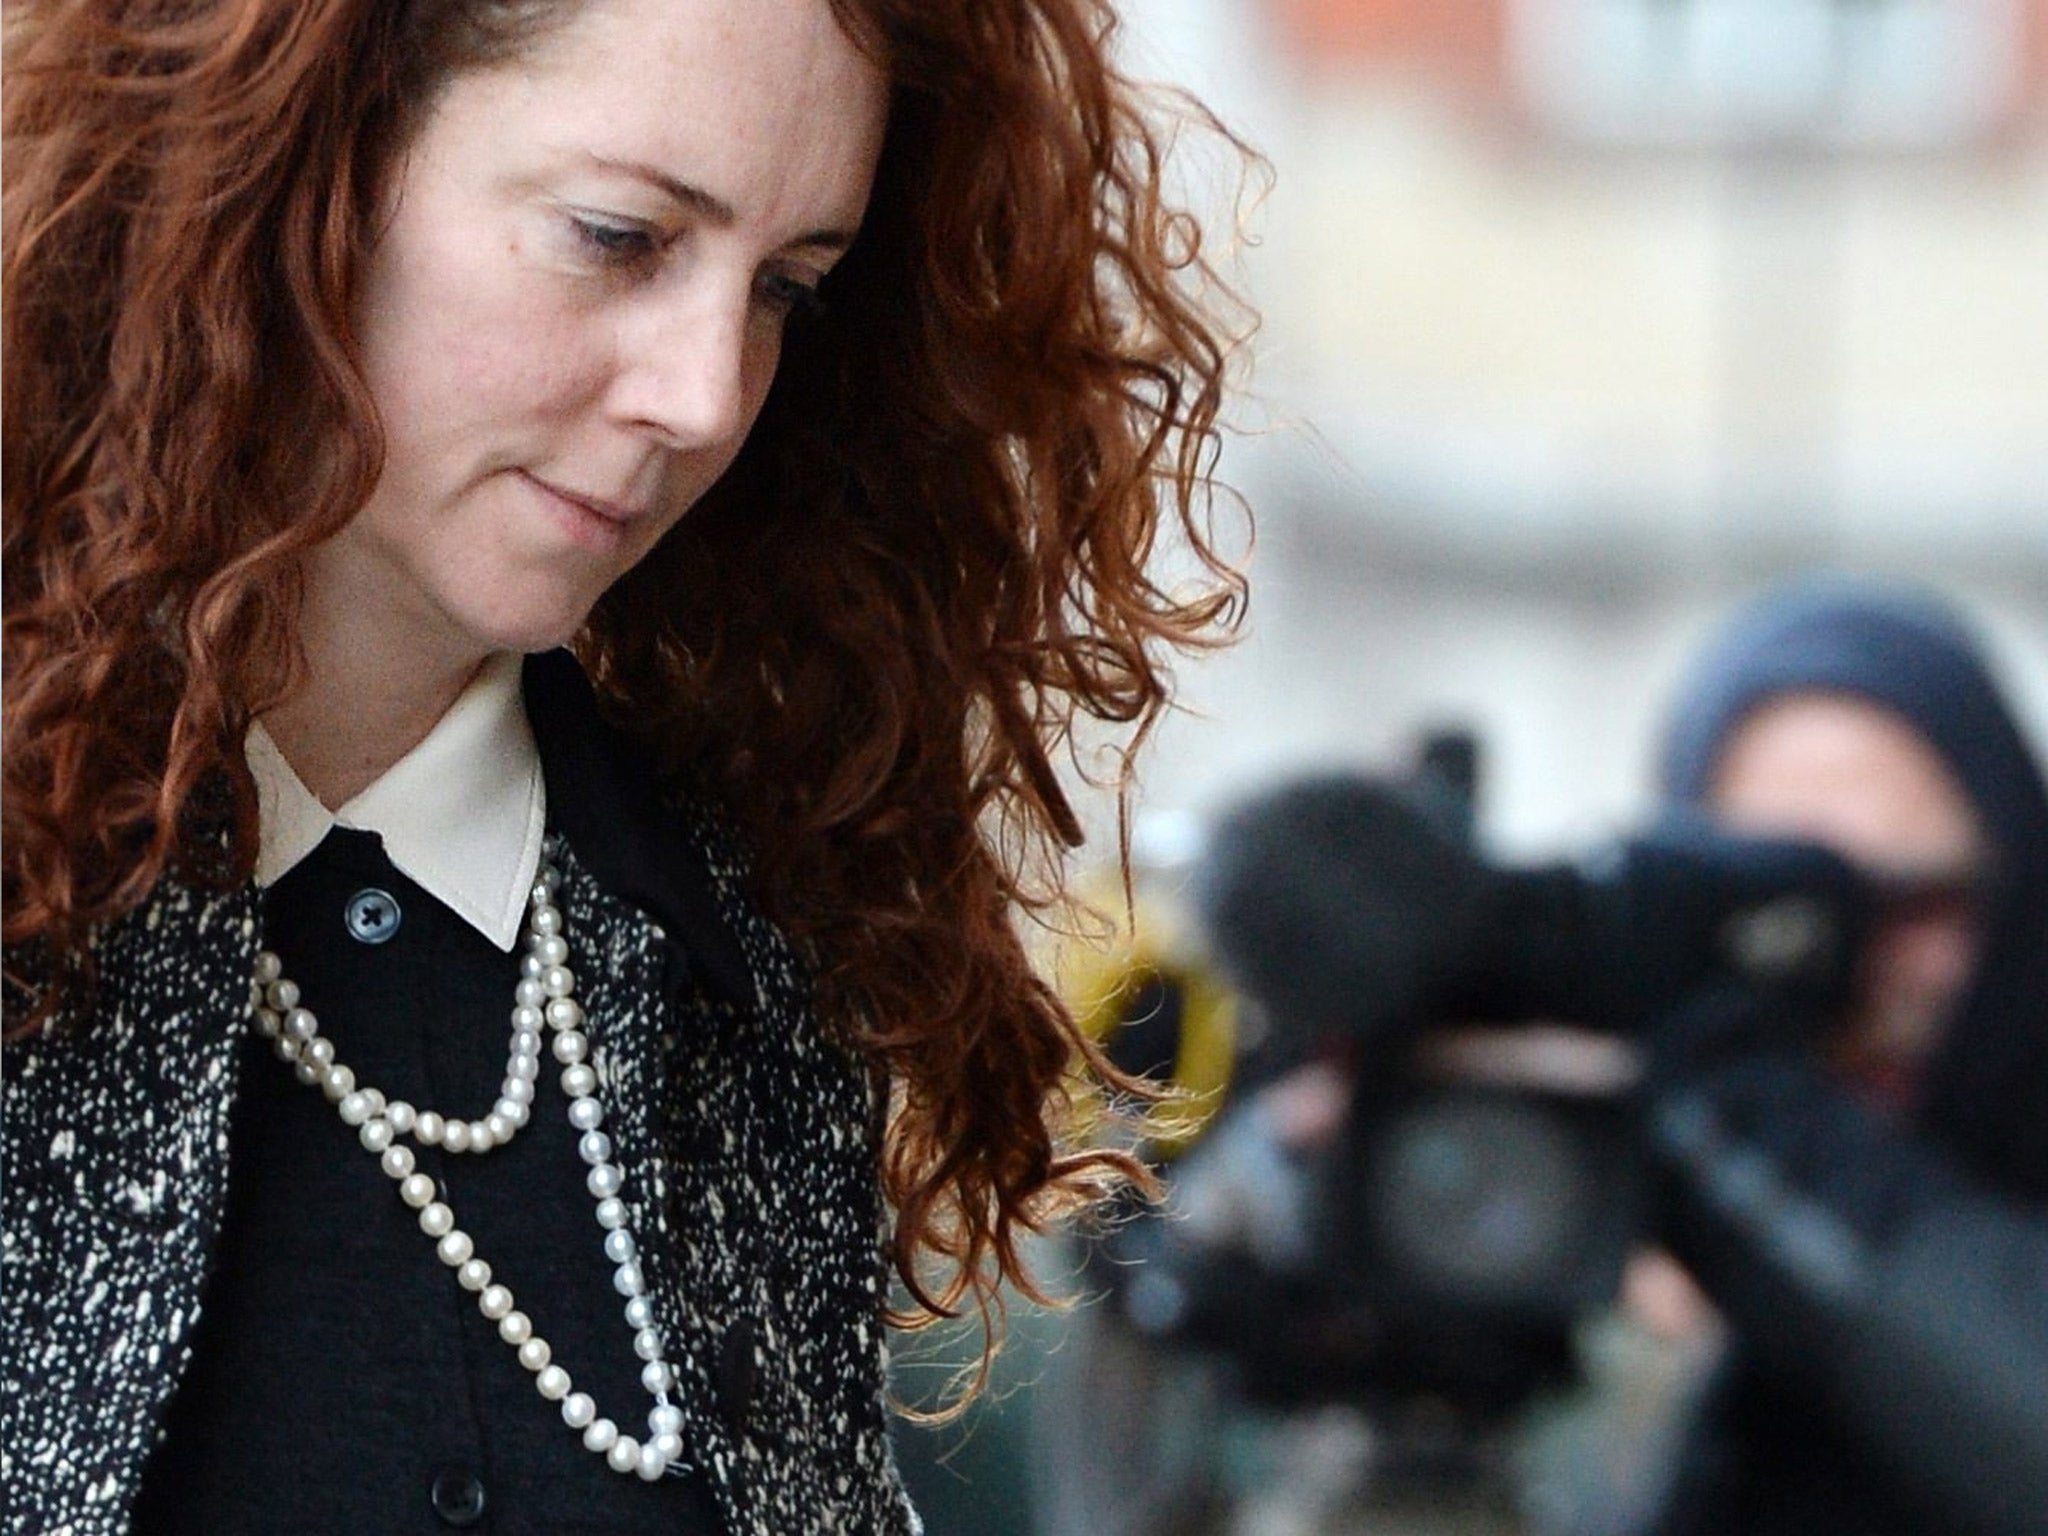 Former Chief Executive of News International, Rebekah Brooks, arrives at the Old Bailey Central Criminal Court